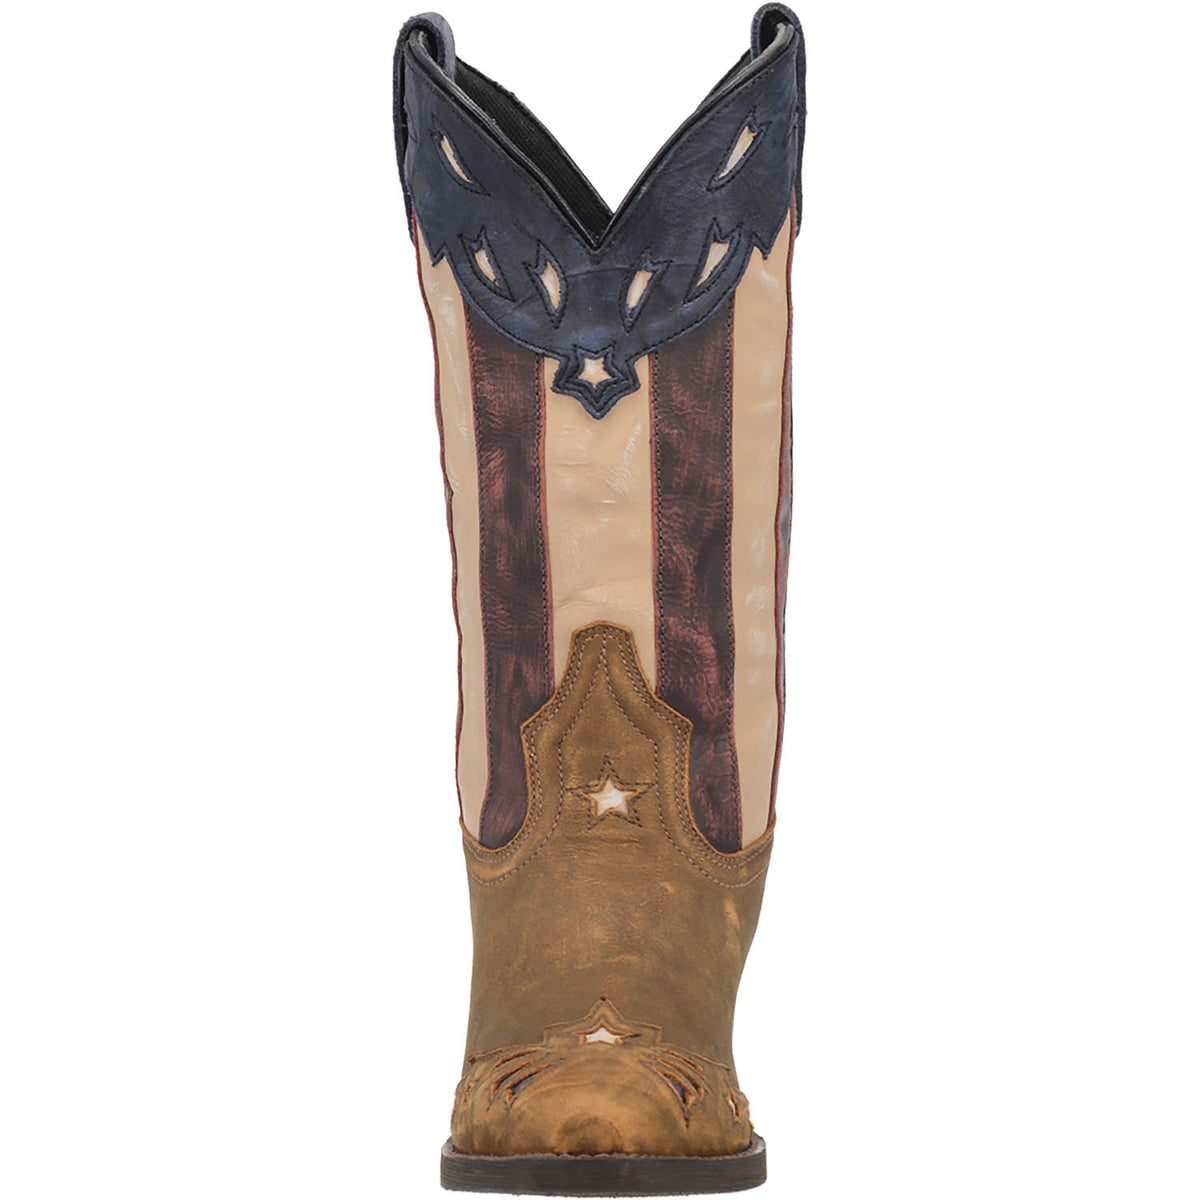 KEYES STARS AND STRIPES LEATHER BOOT Cover